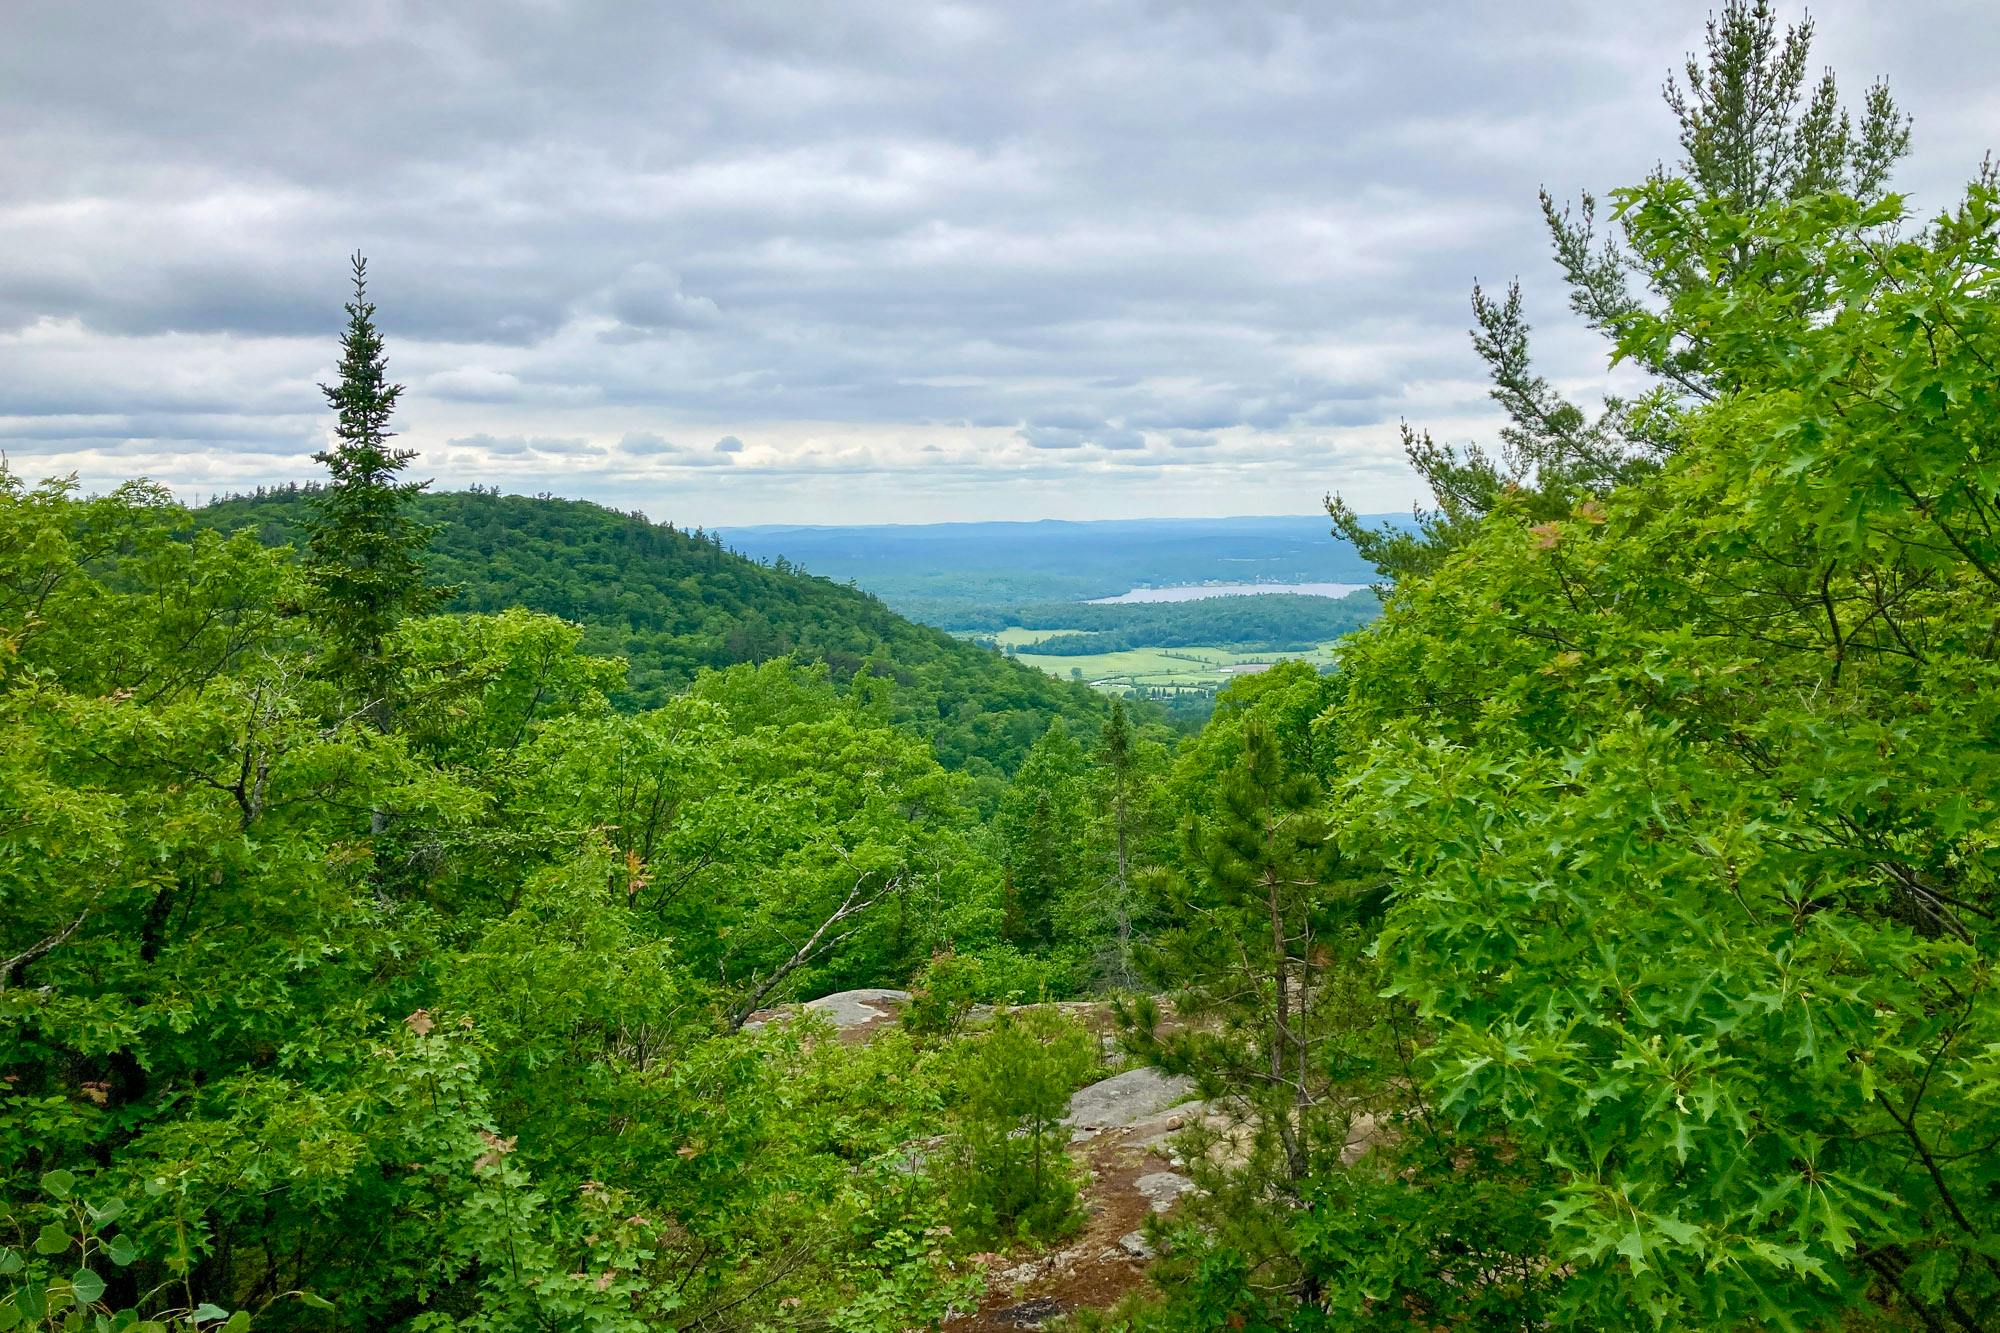 A view of the Quebec backcountry.